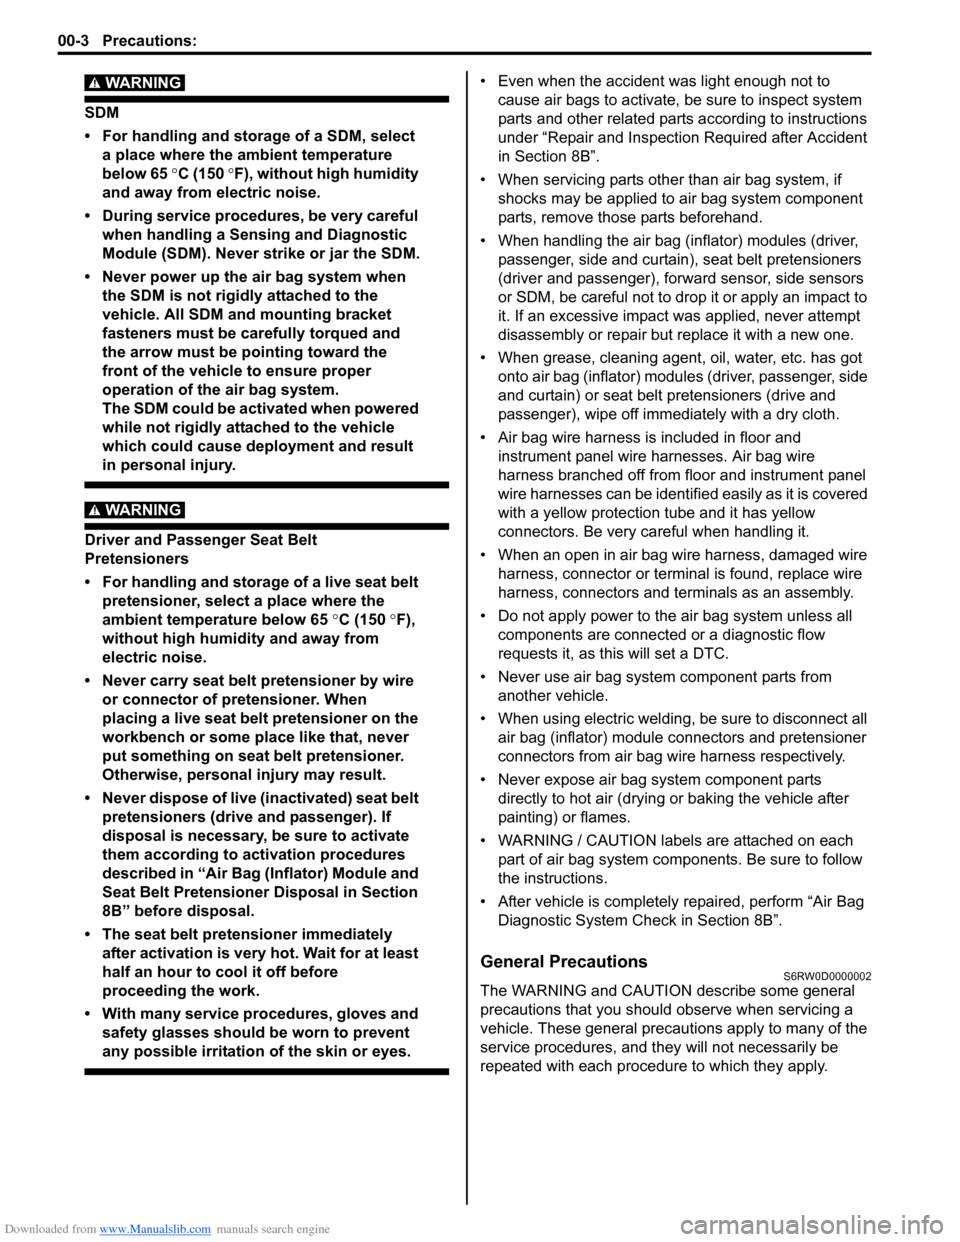 SUZUKI SX4 2006 1.G Service Workshop Manual Downloaded from www.Manualslib.com manuals search engine 00-3 Precautions: 
WARNING! 
SDM
• For handling and storage of a SDM, select 
a place where the ambient temperature 
below 65 °C (150 °F), 